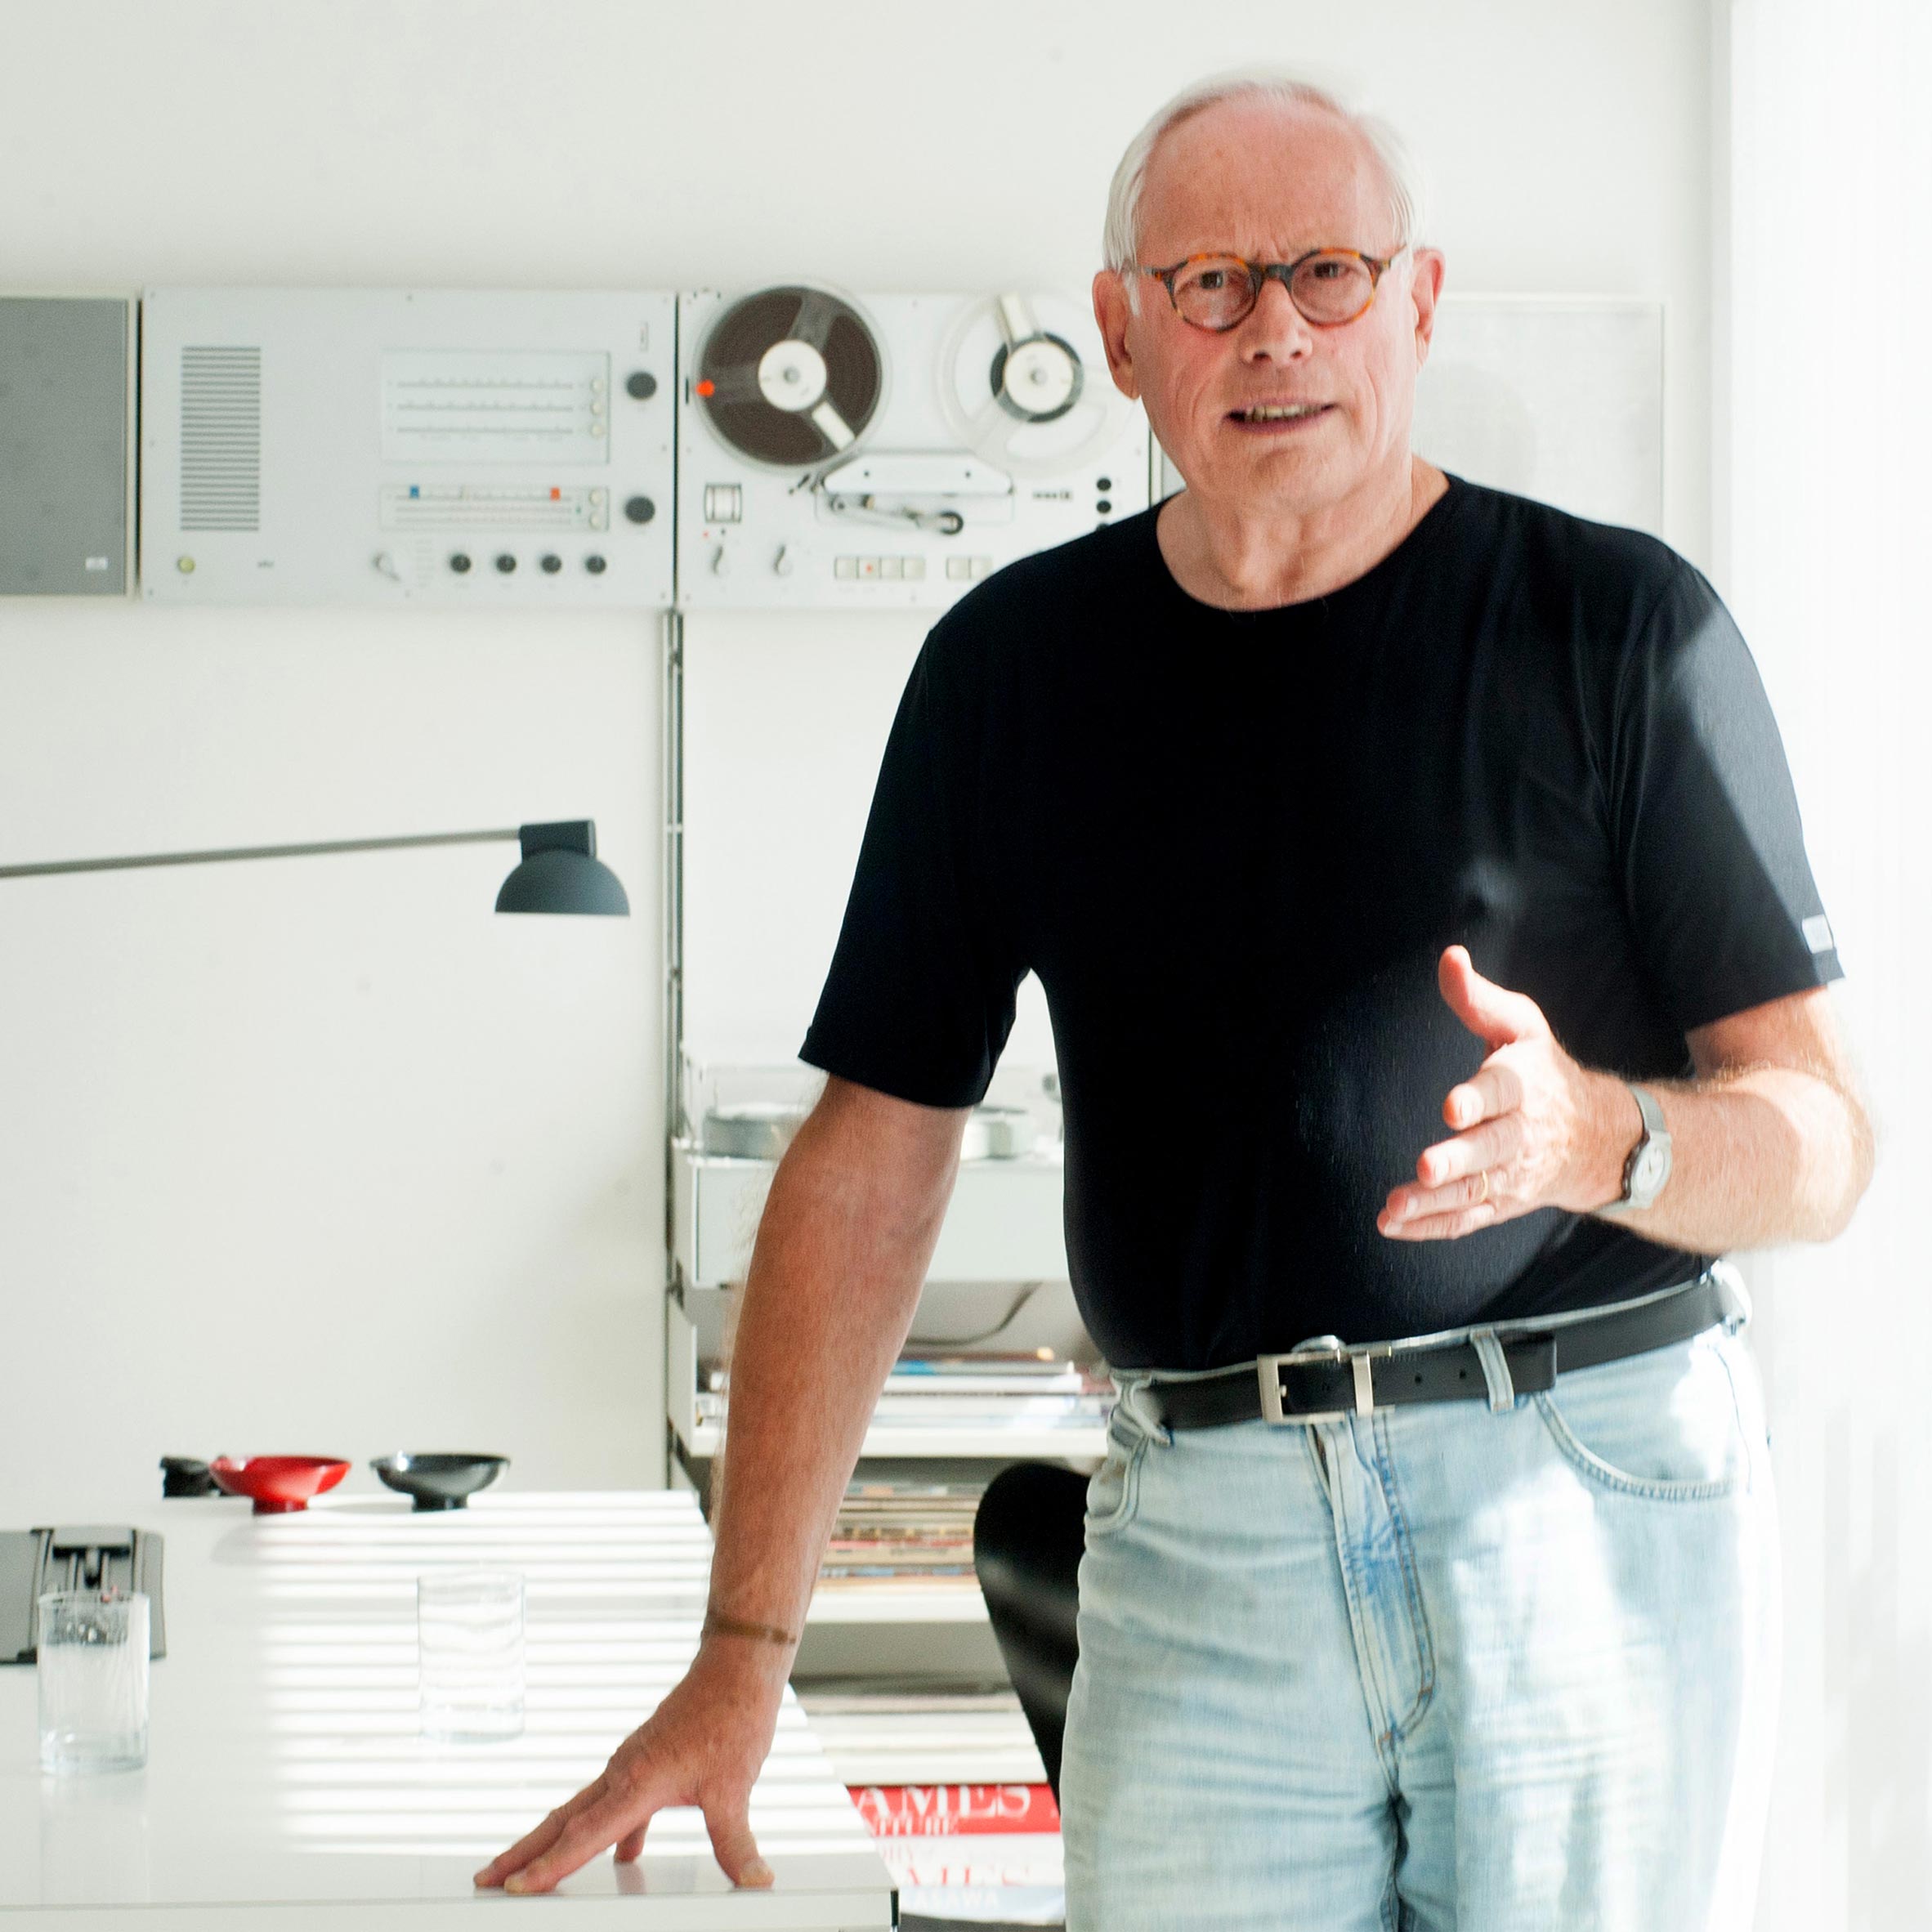 Simplicity is the key to says Dieter Rams